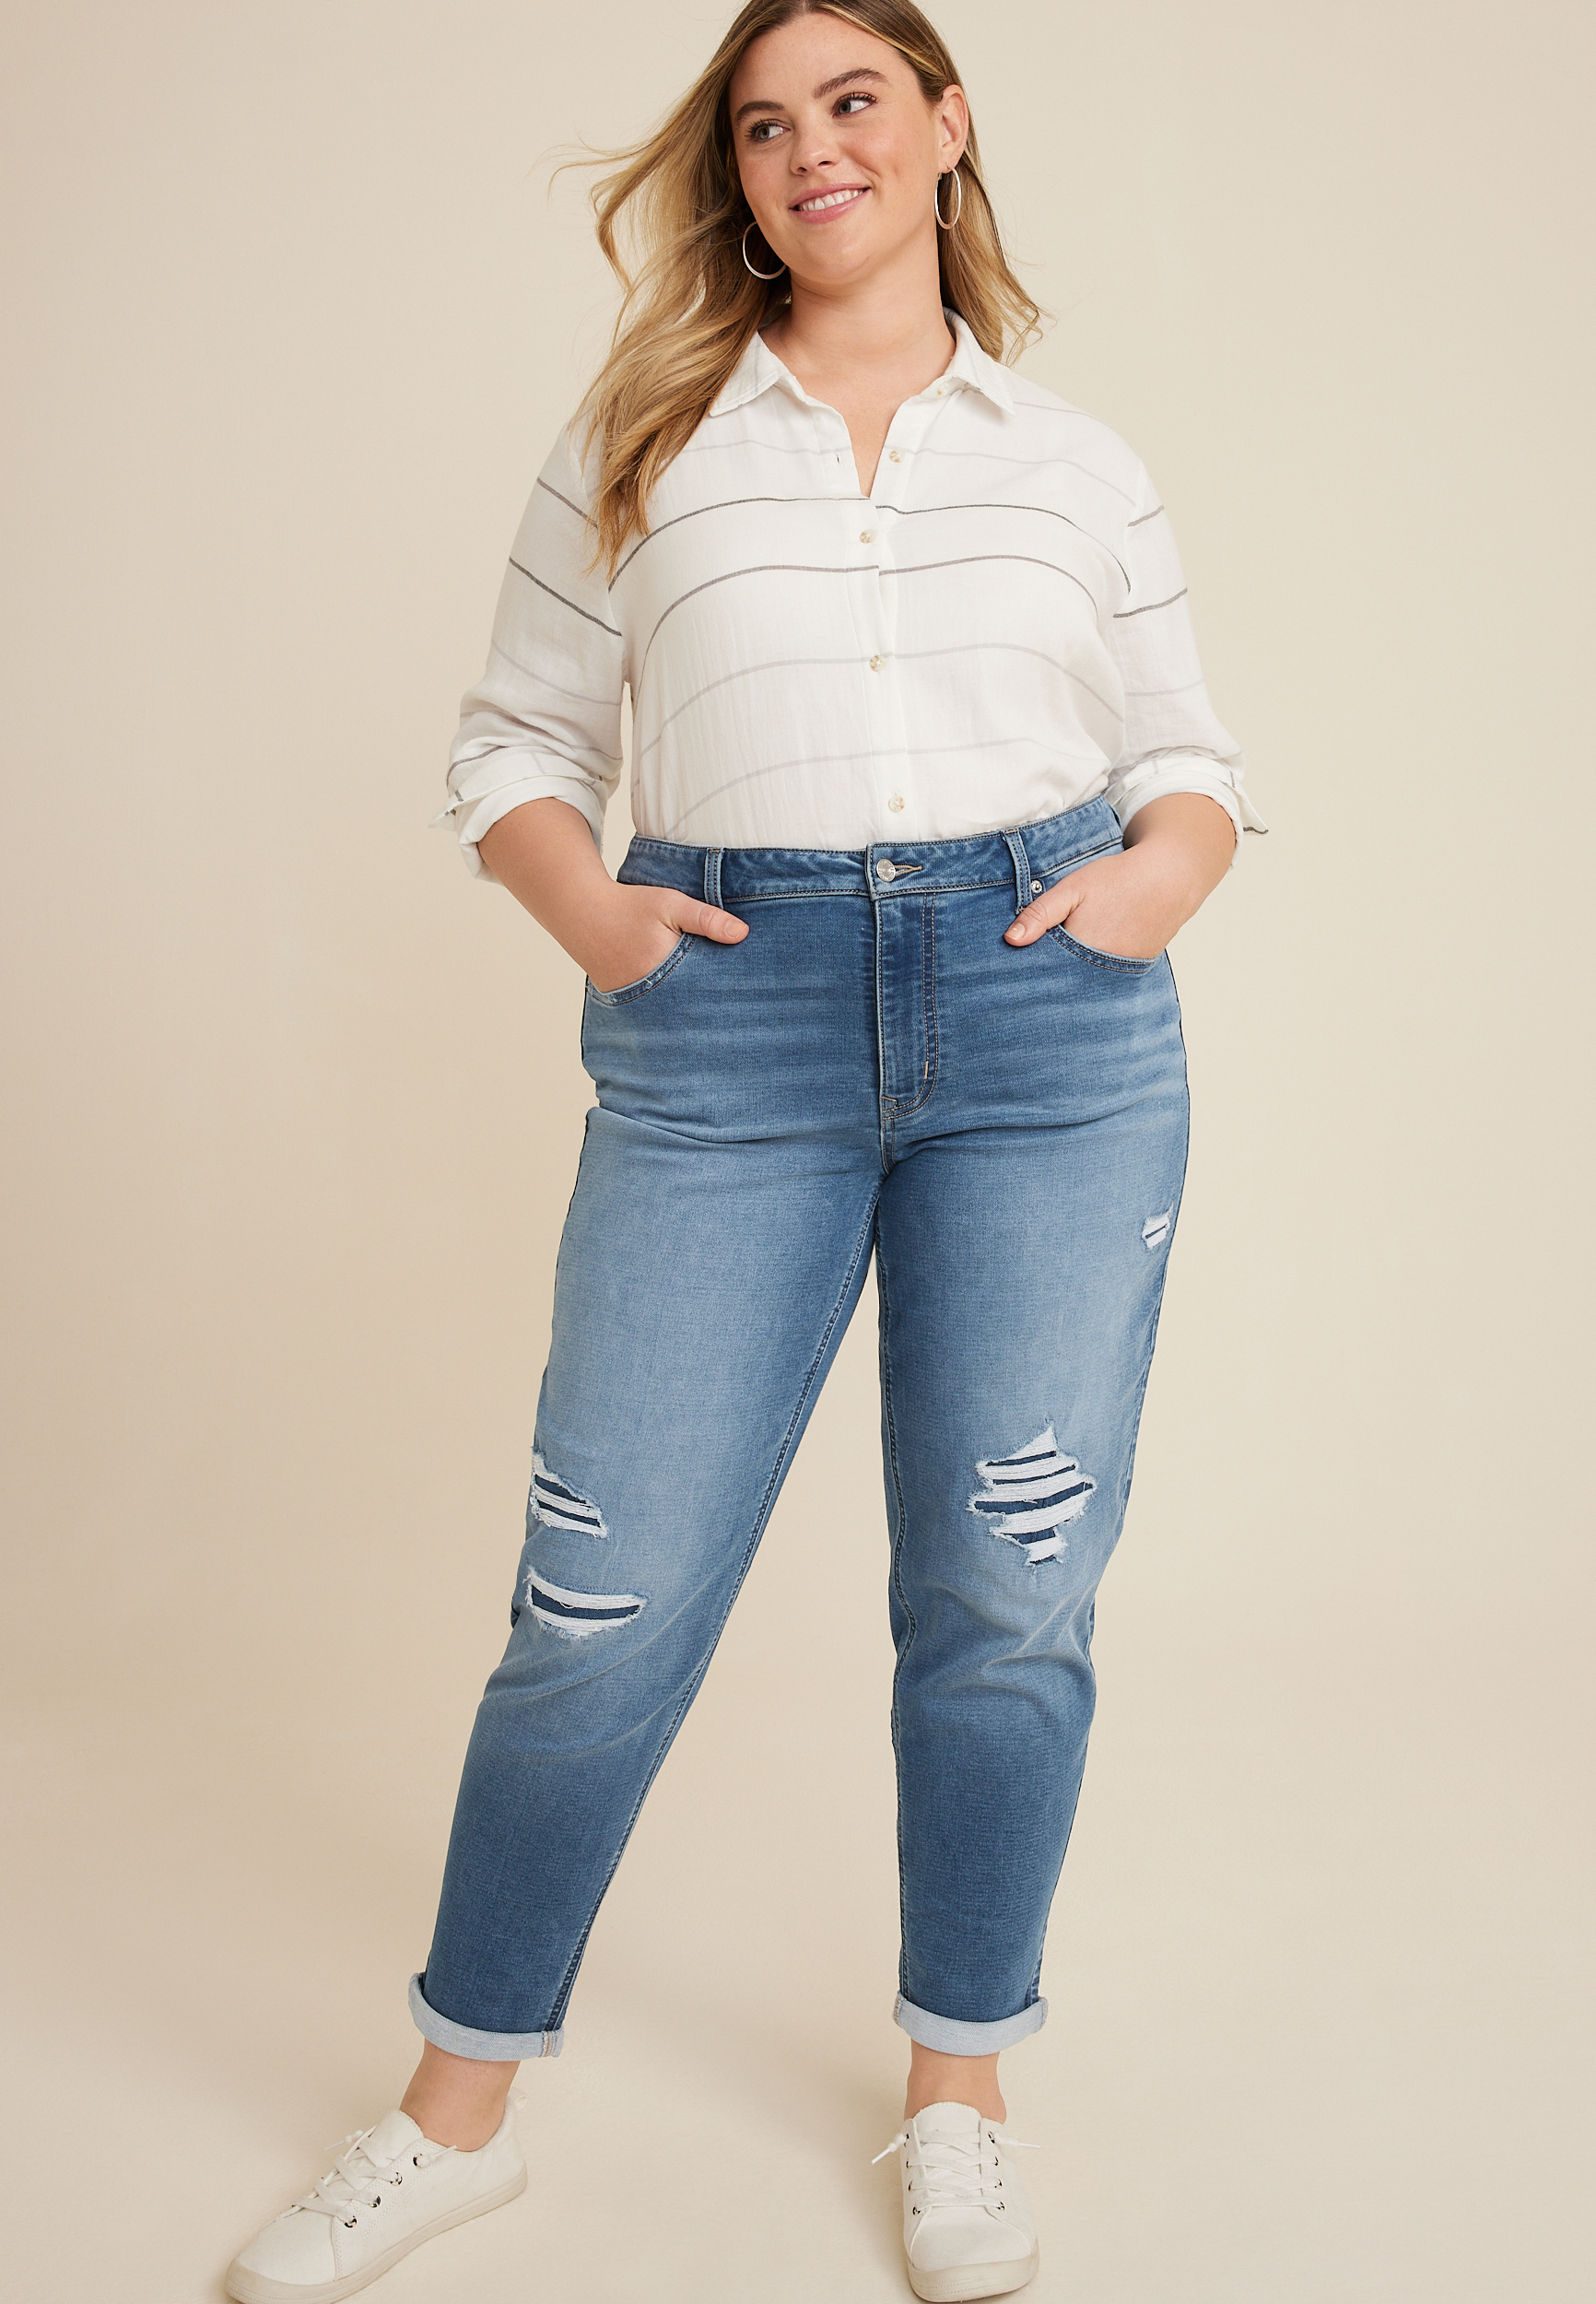 Clearance Plus Size Jeans For Women | maurices